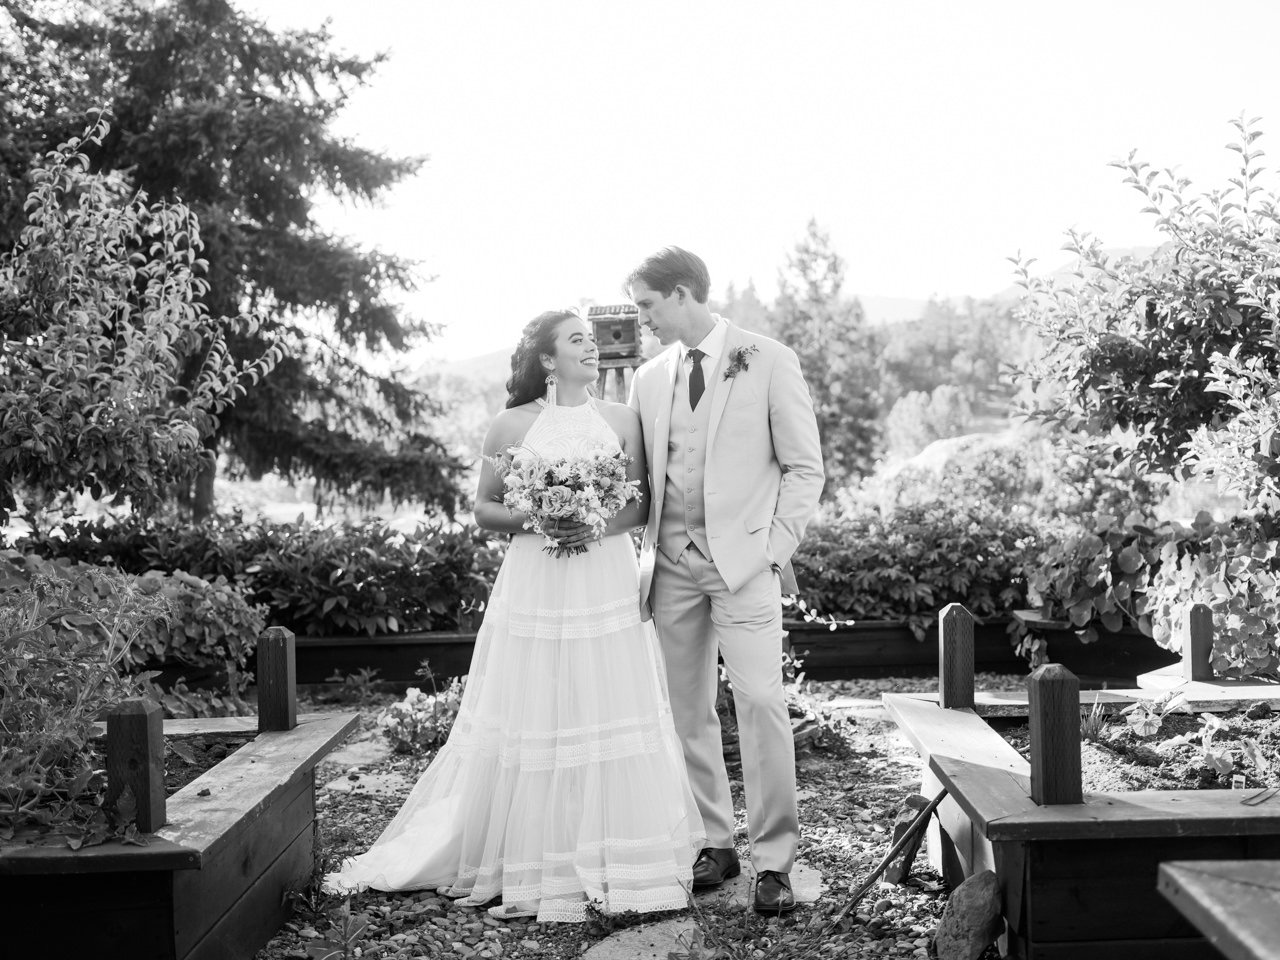  Classic portrait of bride and groom in black and white standing in raised bed garden 